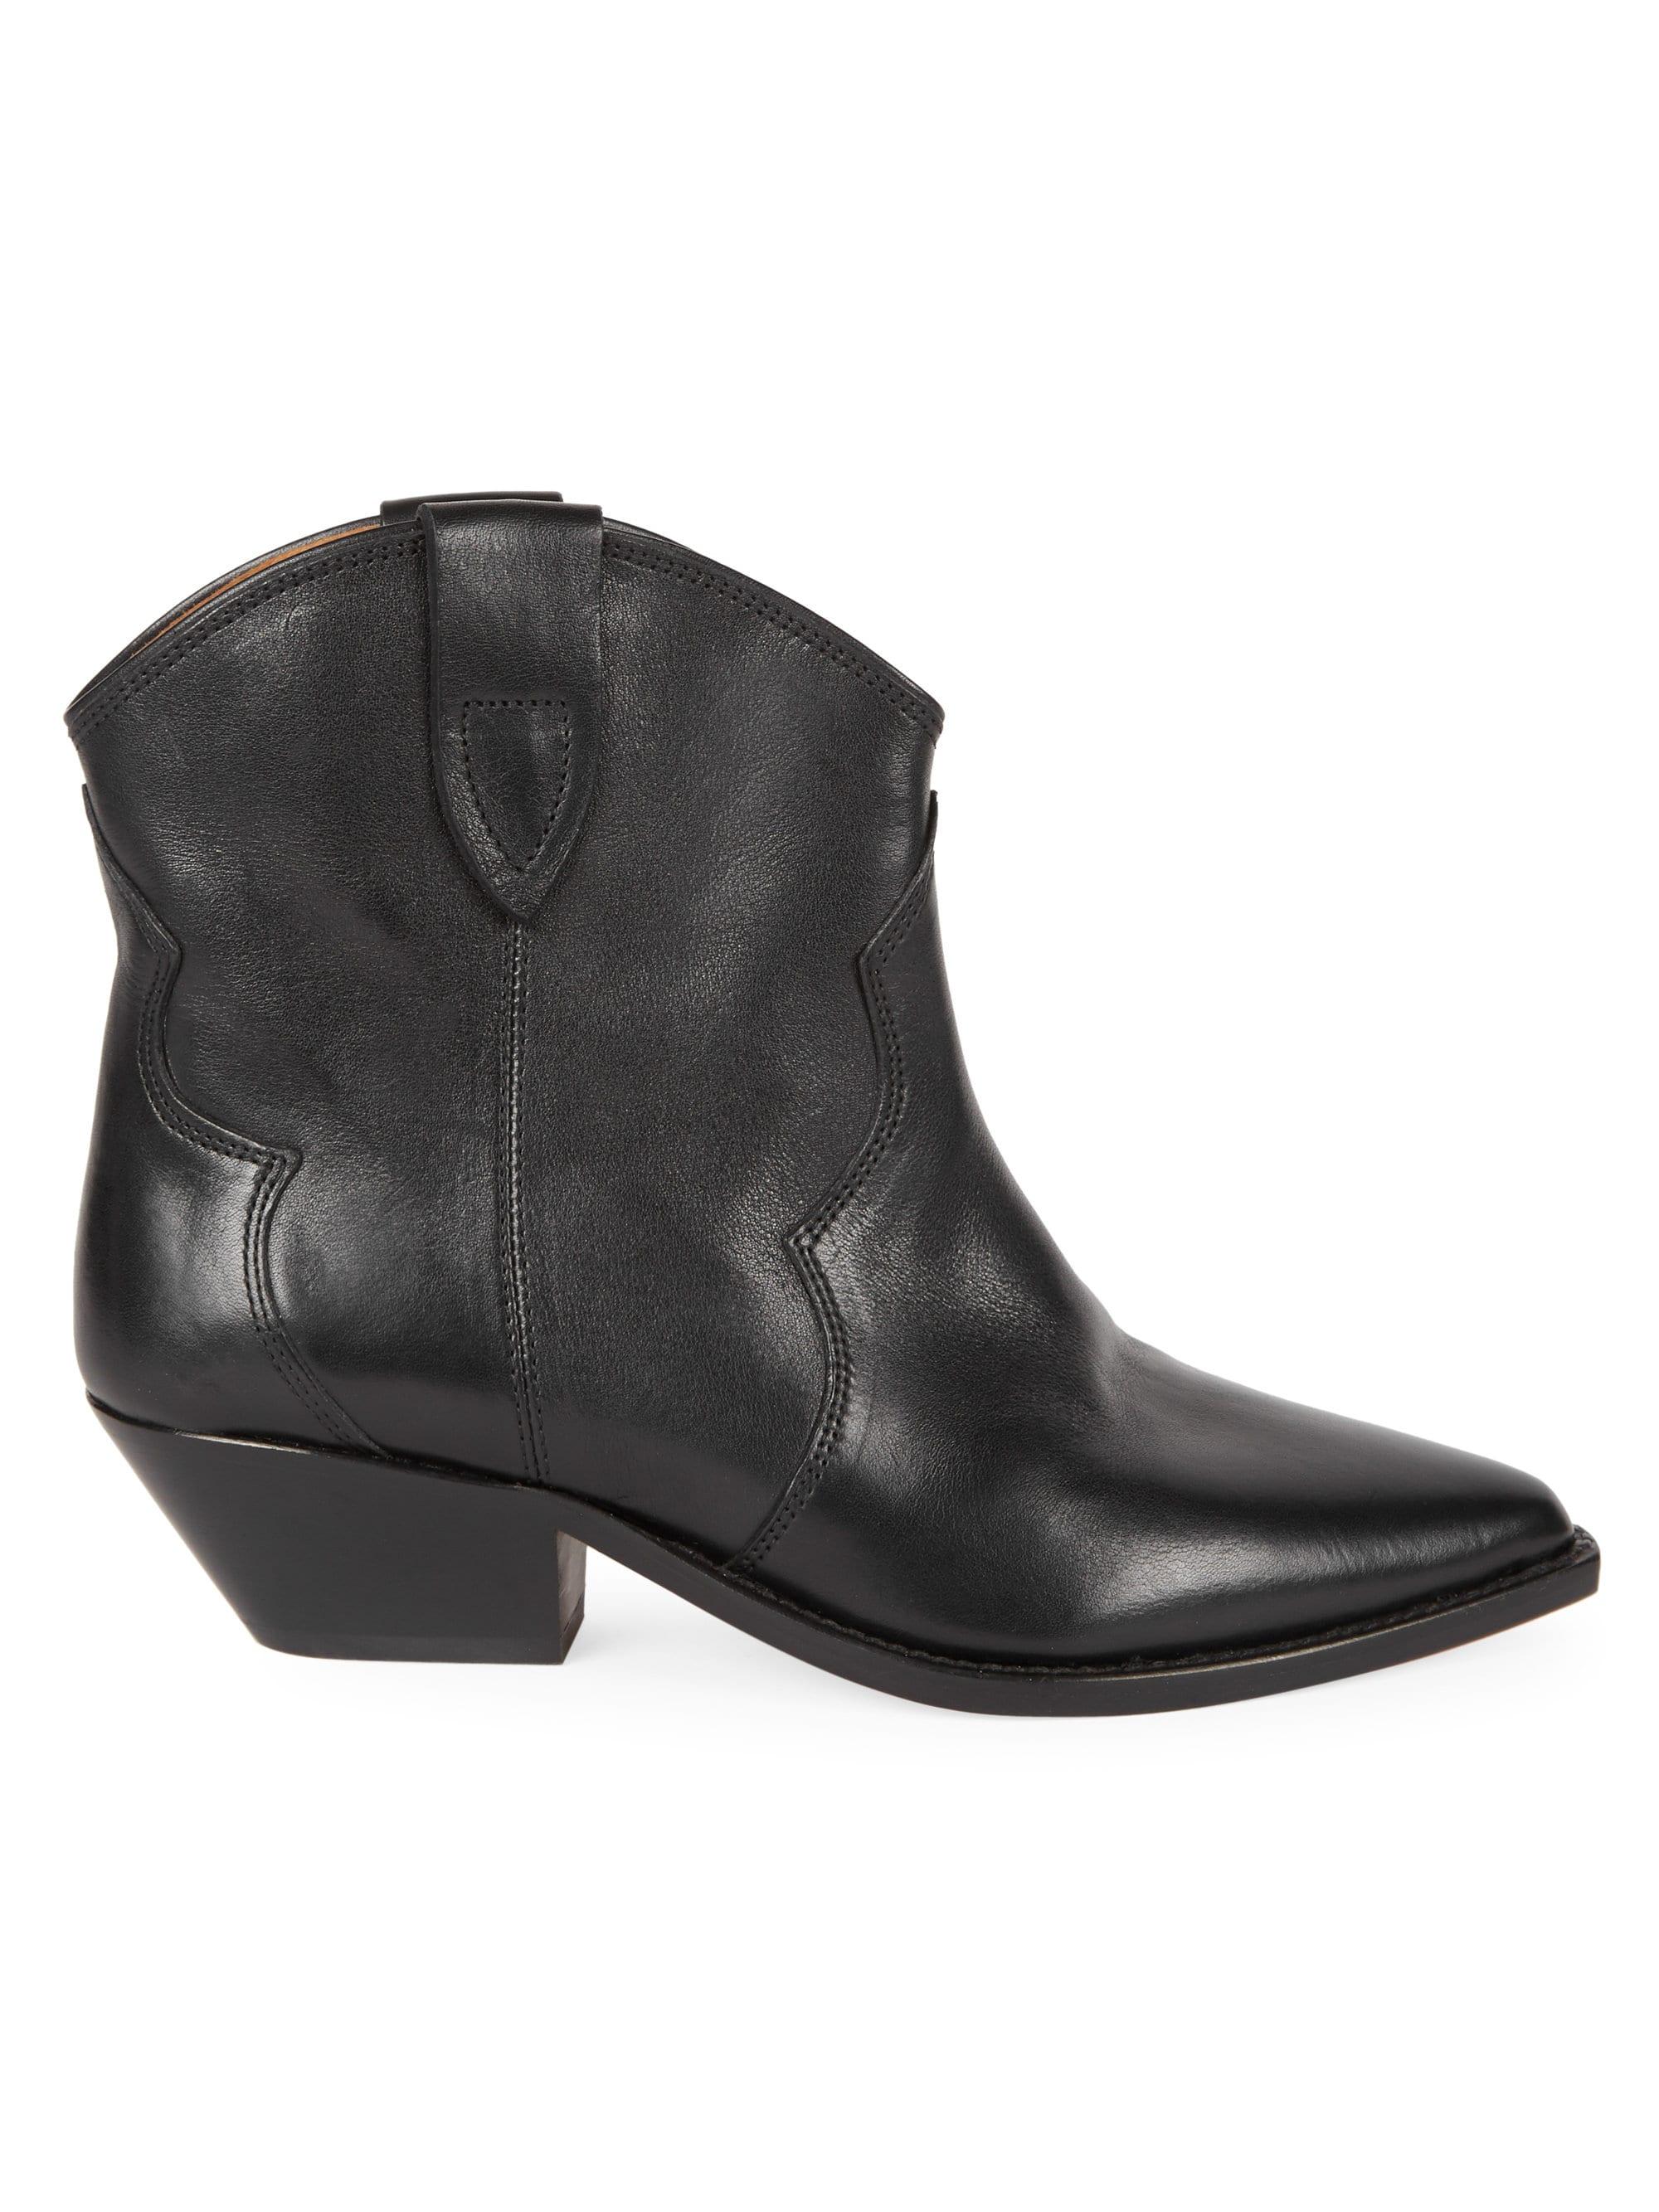 Isabel Marant Dewina Leather Western Booties in Black - Lyst